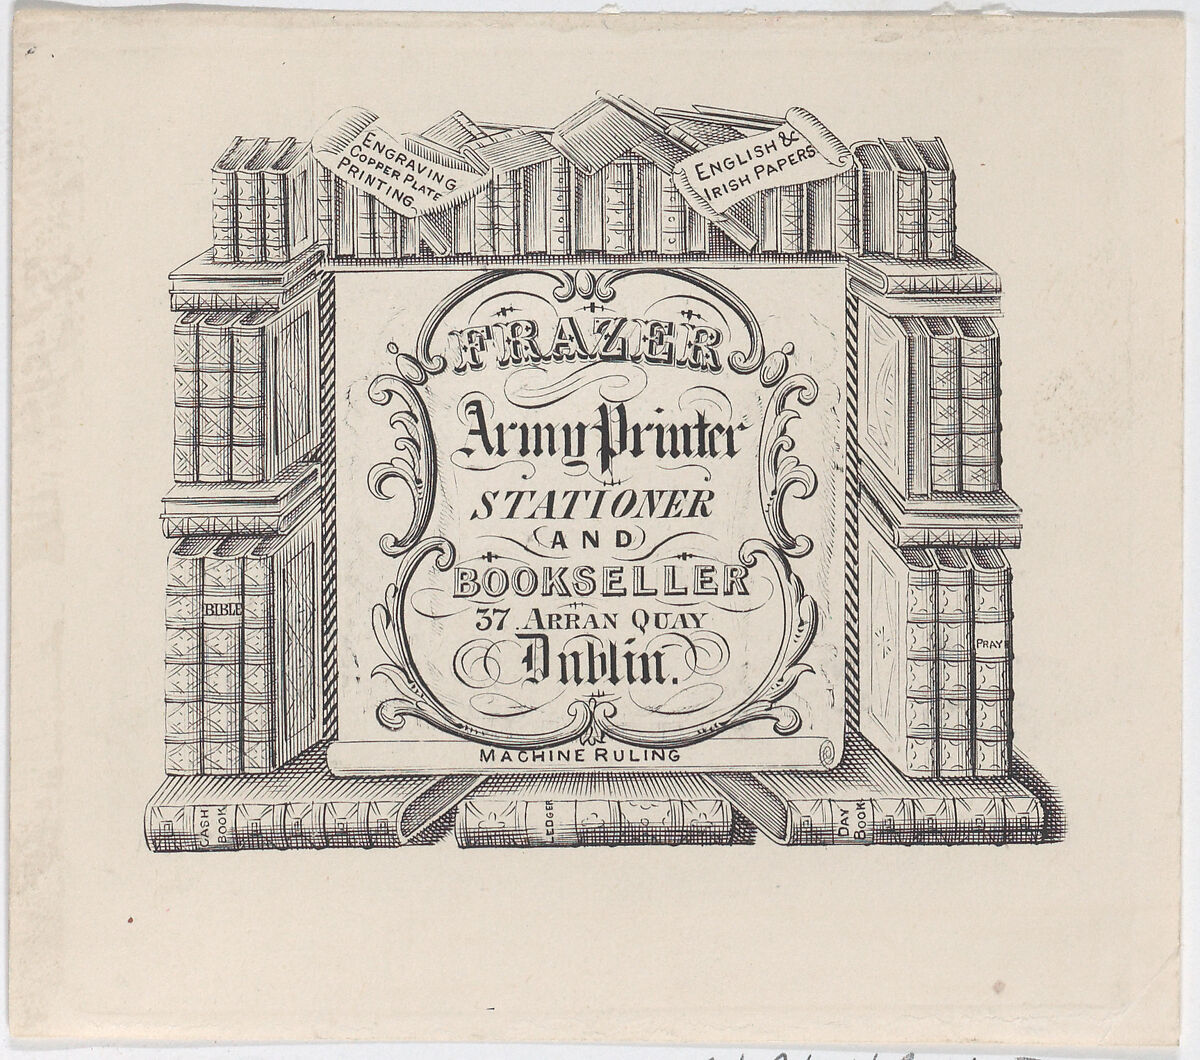 Trade card for Frazer, Army Printer, Stationer and Bookbinder, Anonymous, Irish, 19th century, Engraving 